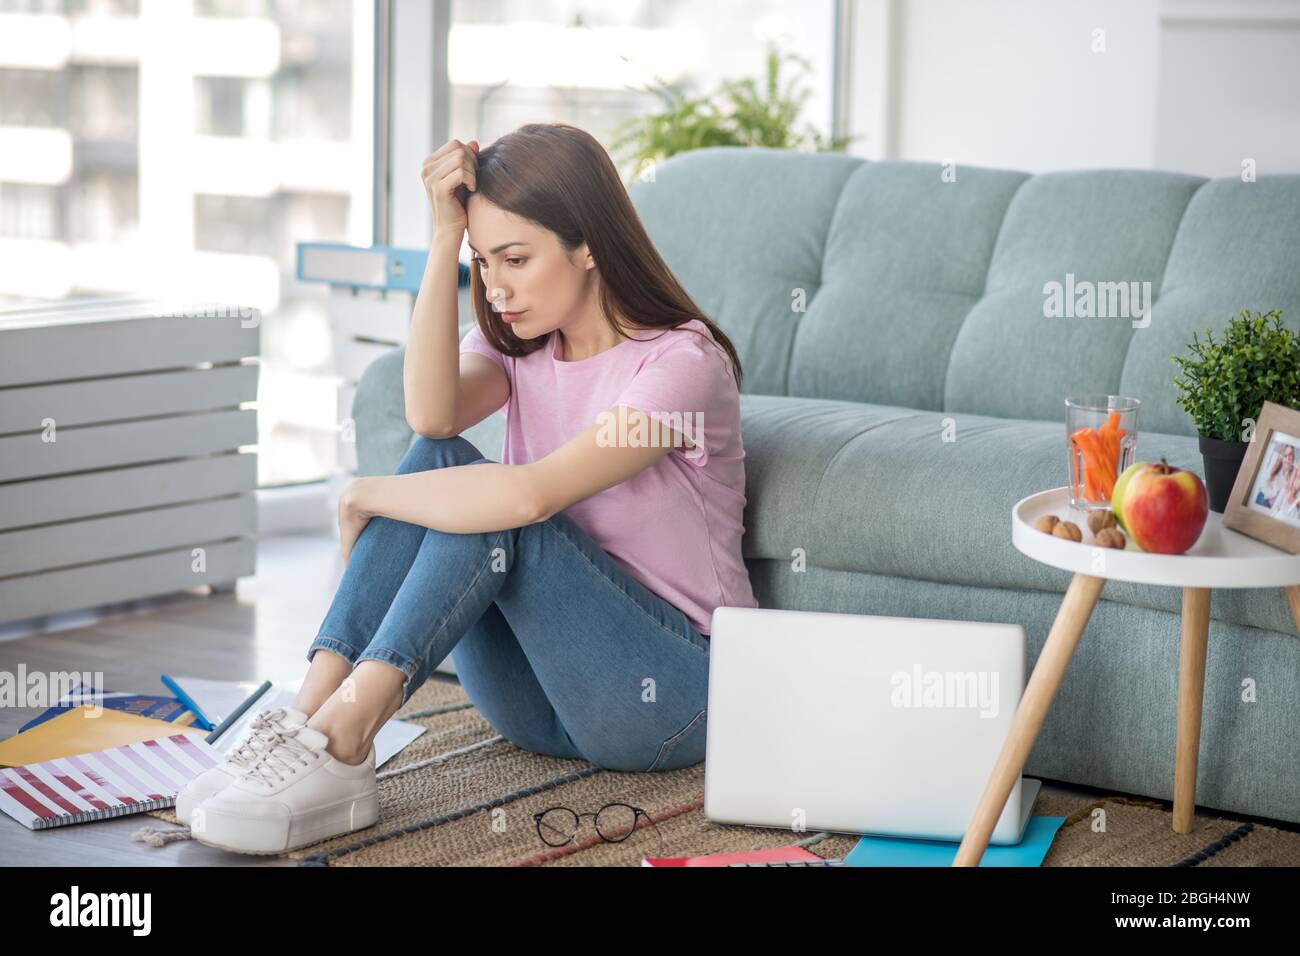 Dark-haired young woman sitting on the floor at home. Stock Photo